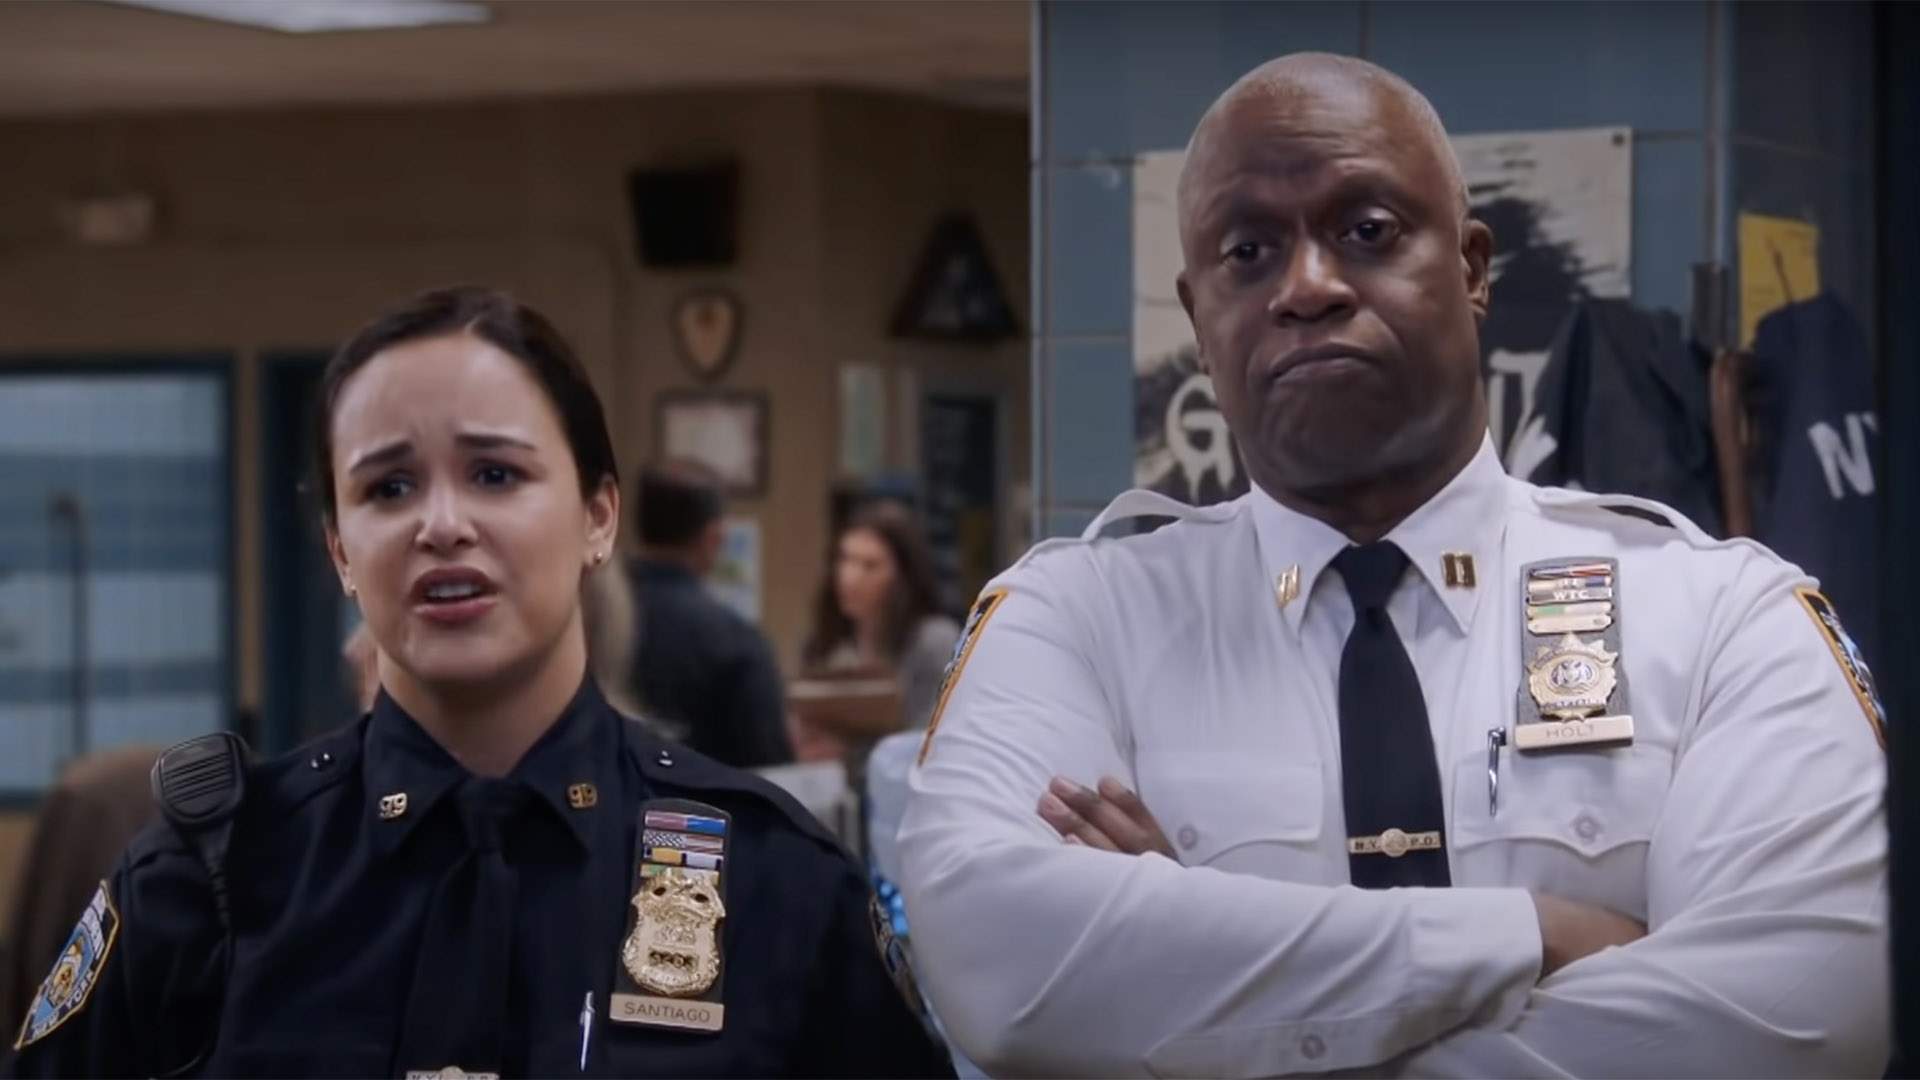 The Noice and Toit Full Trailer for the Final Season of 'Brooklyn Nine-Nine' Is Here